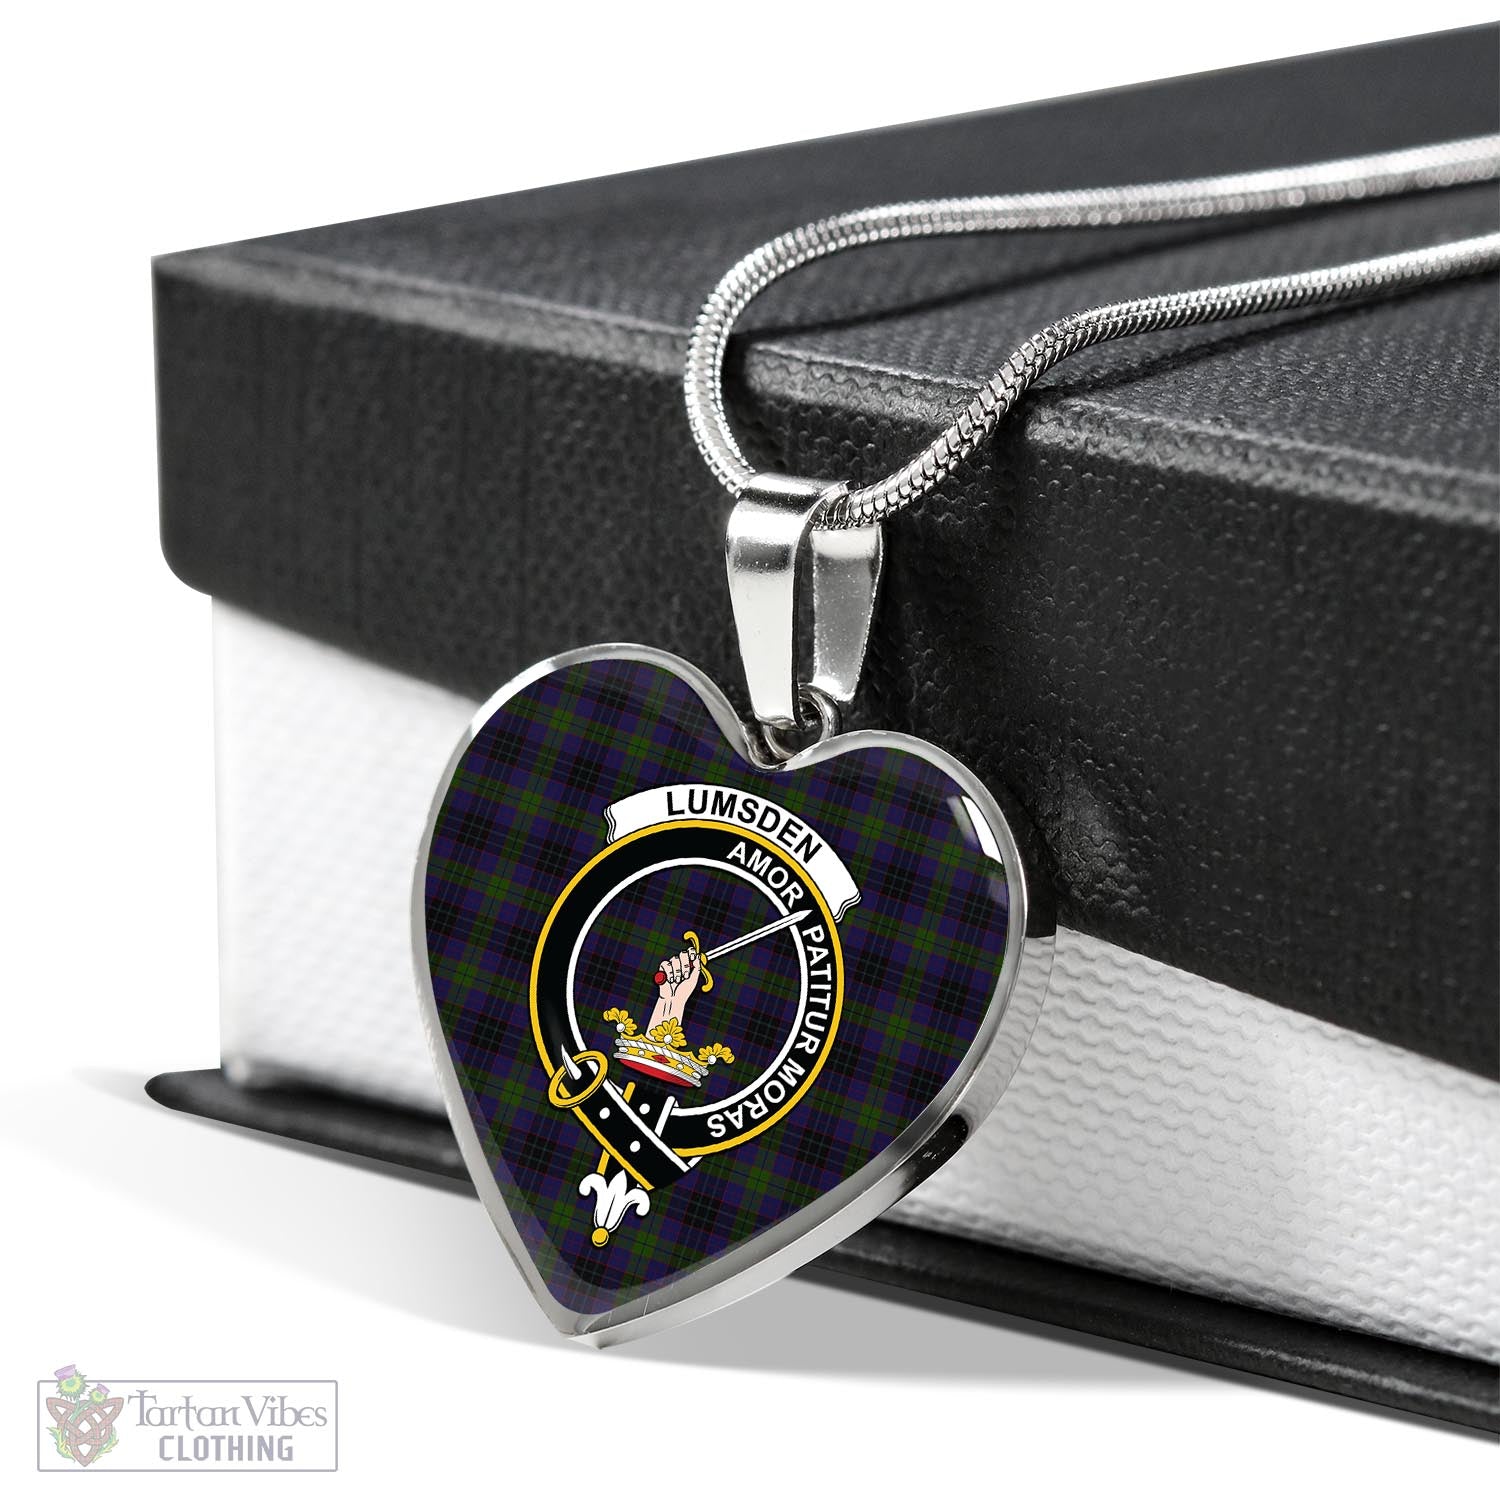 Tartan Vibes Clothing Lumsden Hunting Tartan Heart Necklace with Family Crest